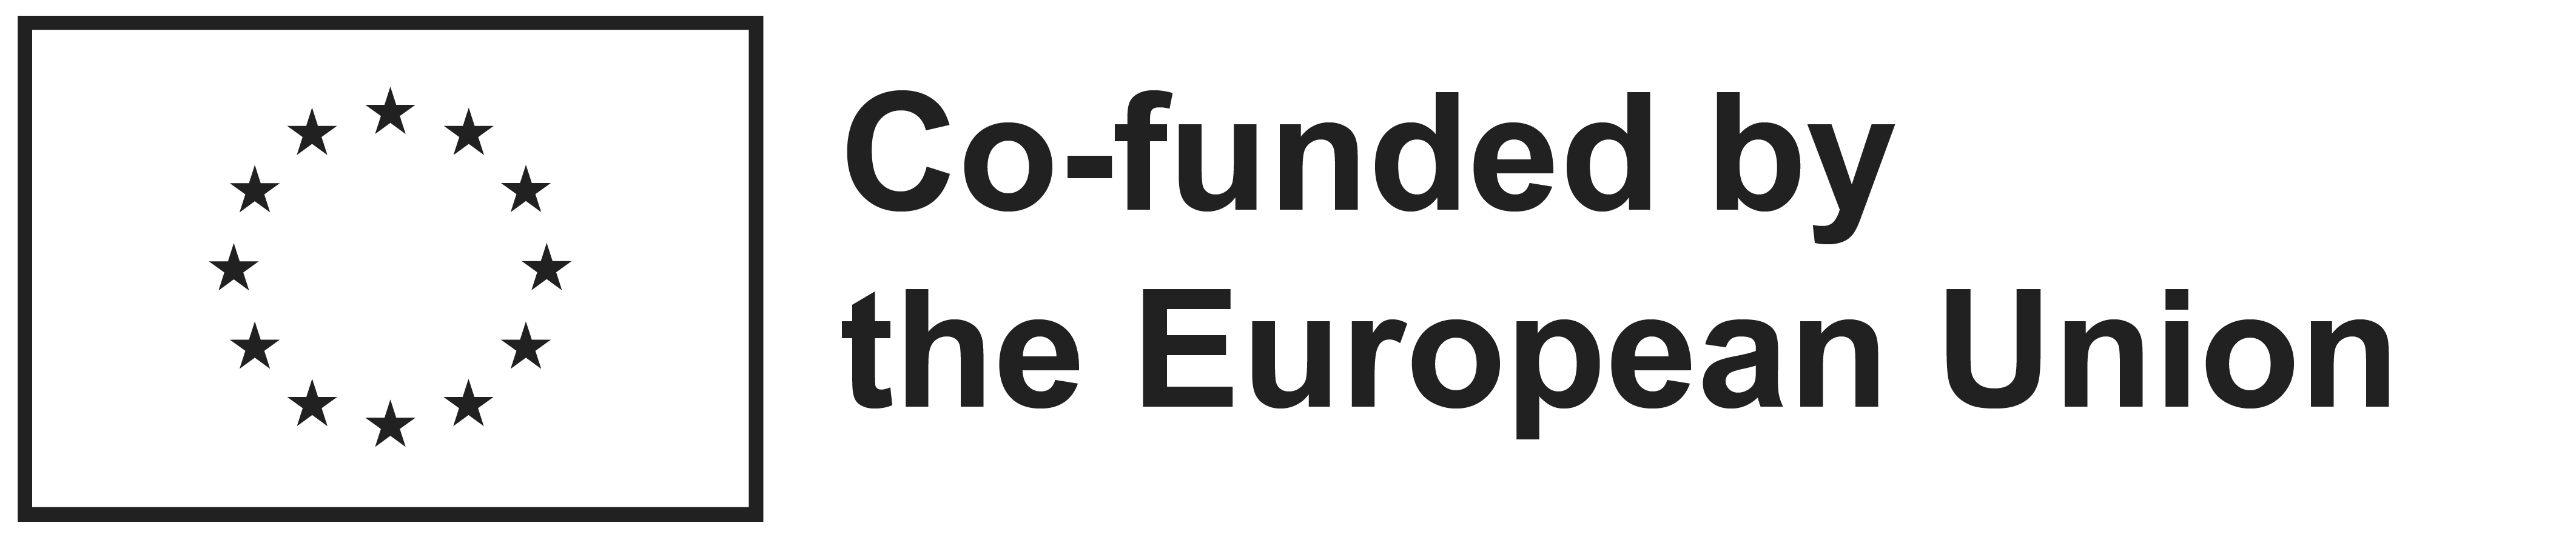 Co-Funded by the European Union (logo)